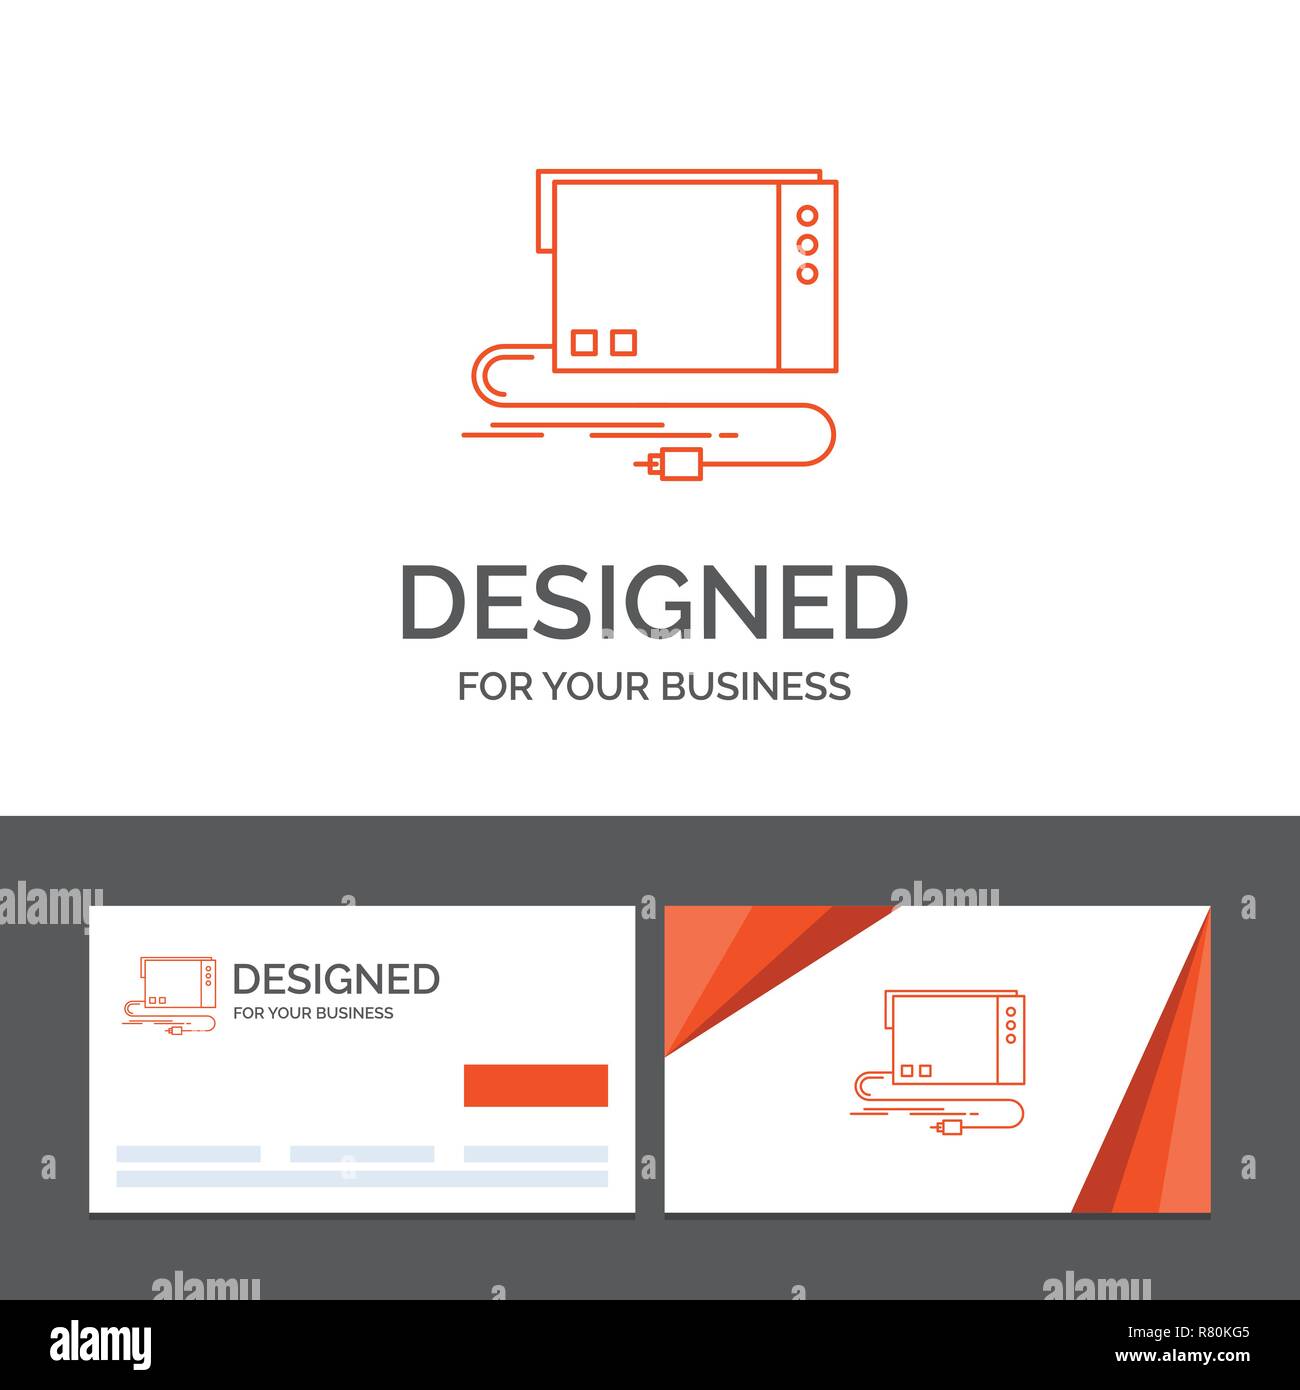 Business logo template for audio, card, external, interface, sound. Orange Visiting Cards with Brand logo template Stock Vector